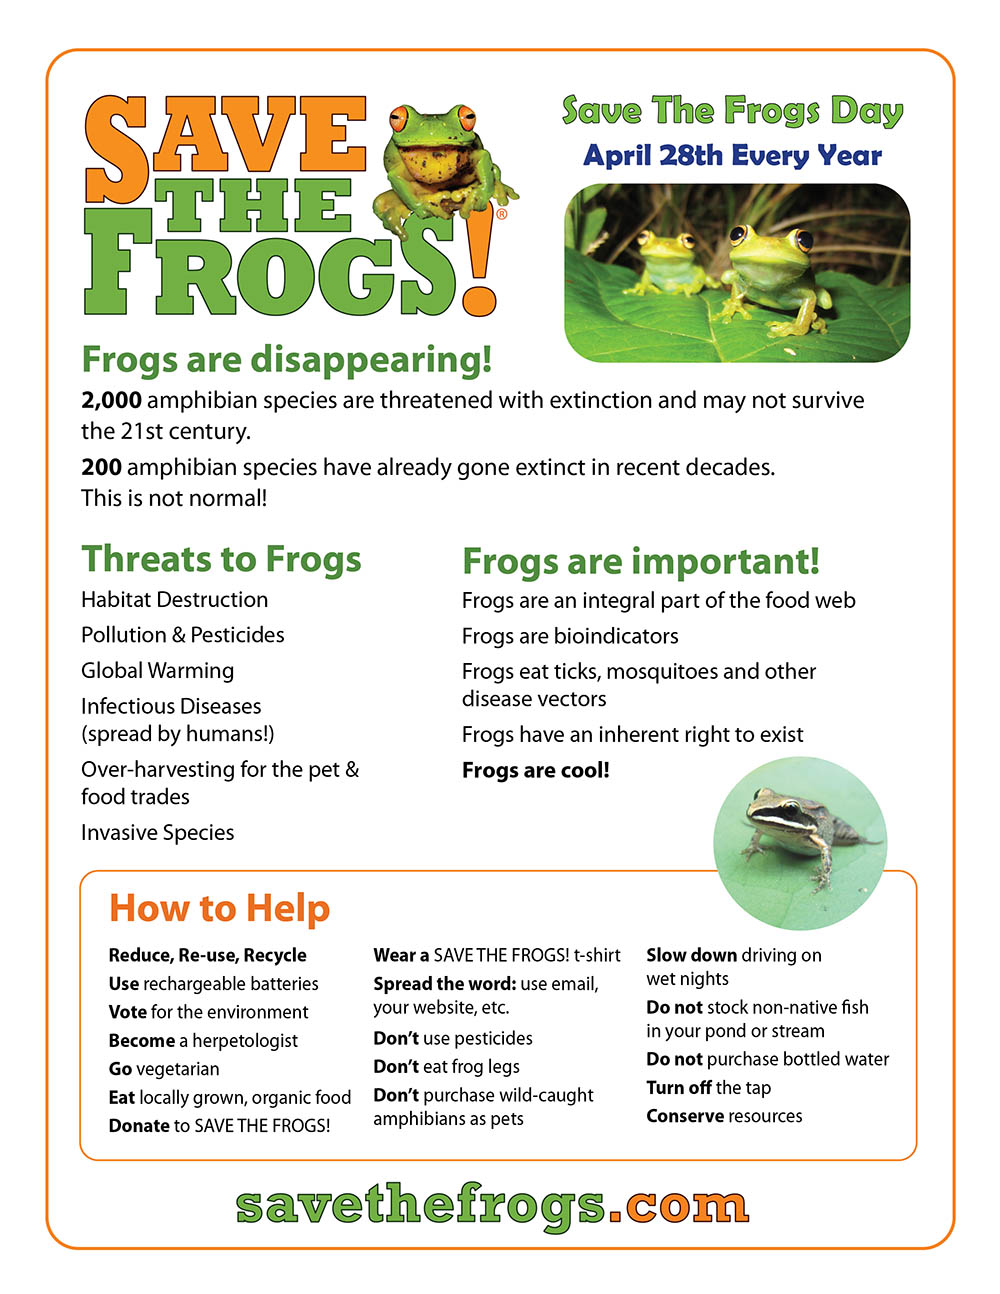 How To Help Save The Frogs Flyer